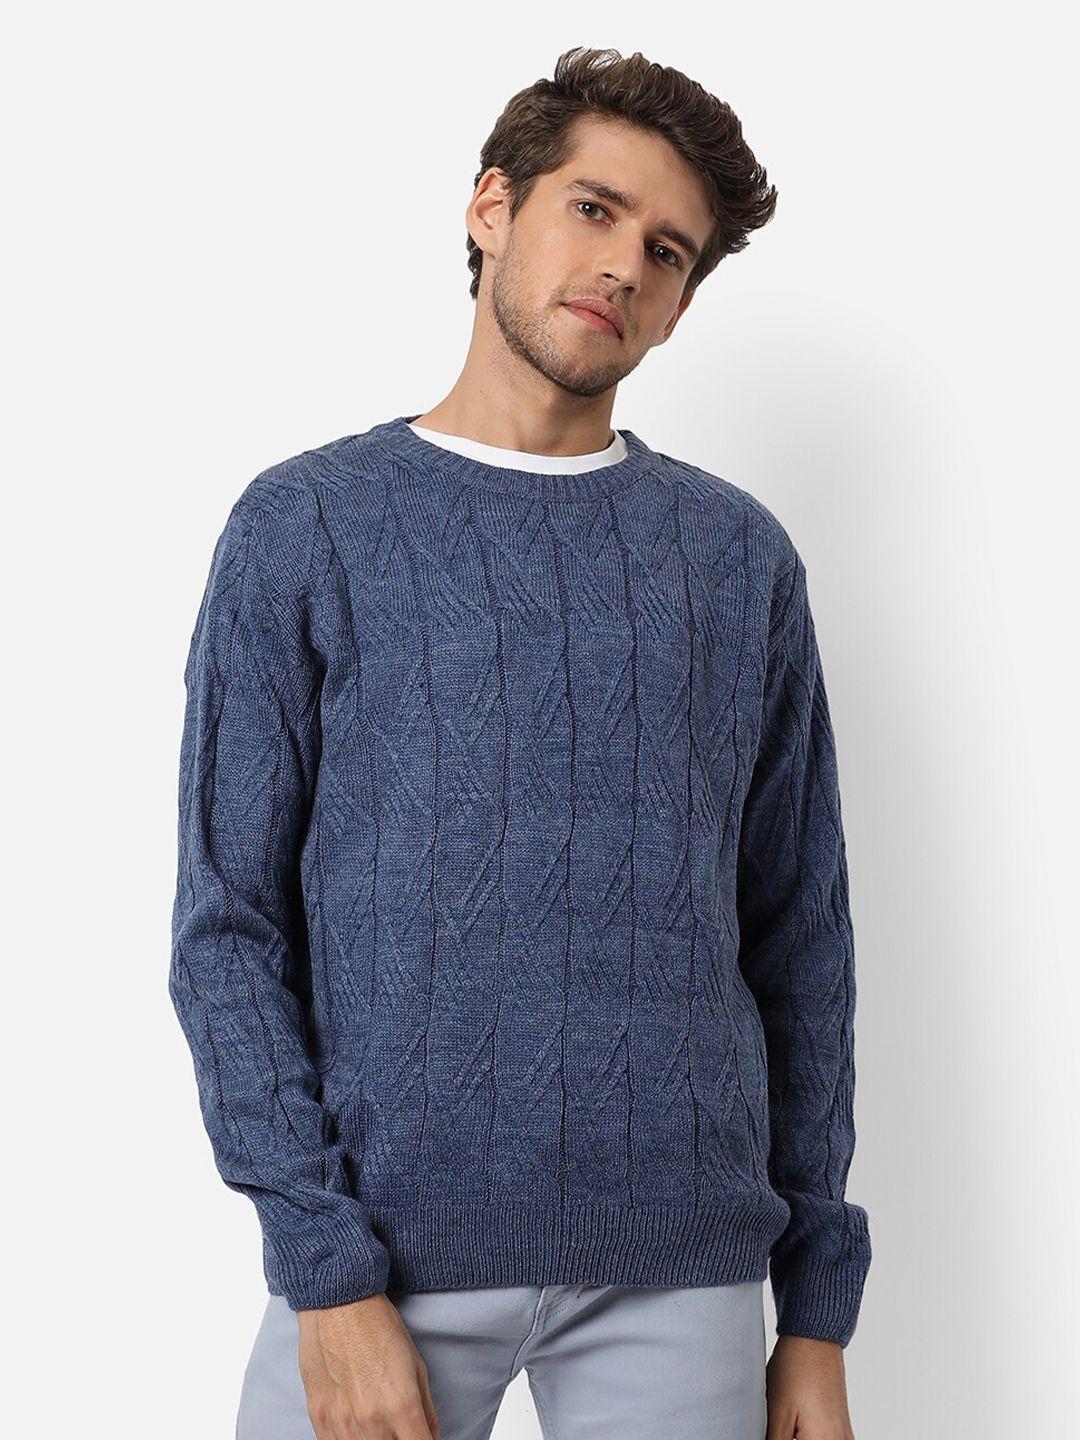 campus-sutra-men-navy-blue-cable-knit-pullover